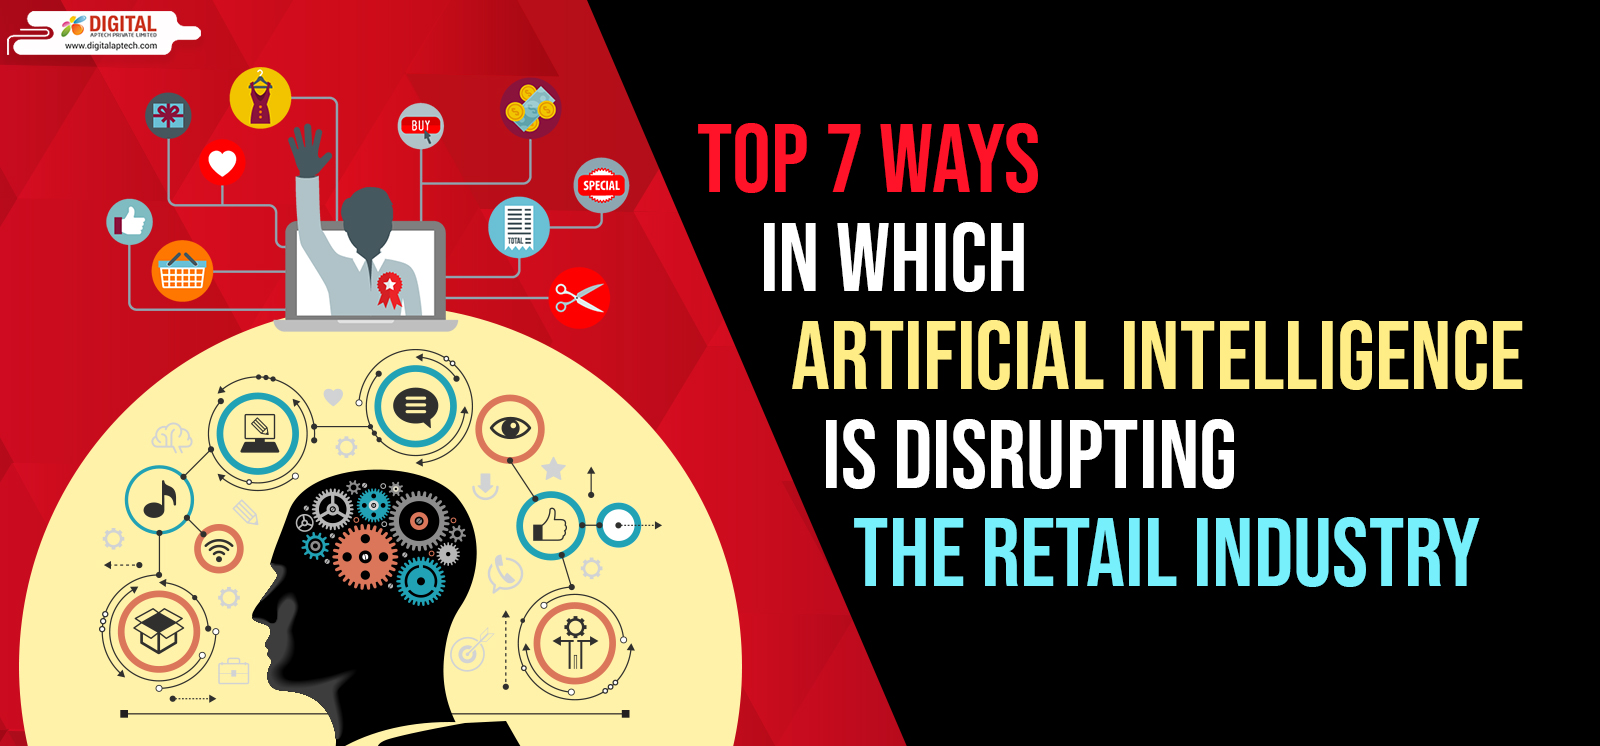 Top 7 Ways in which Artificial Intelligence is Disrupting the Retail Industry